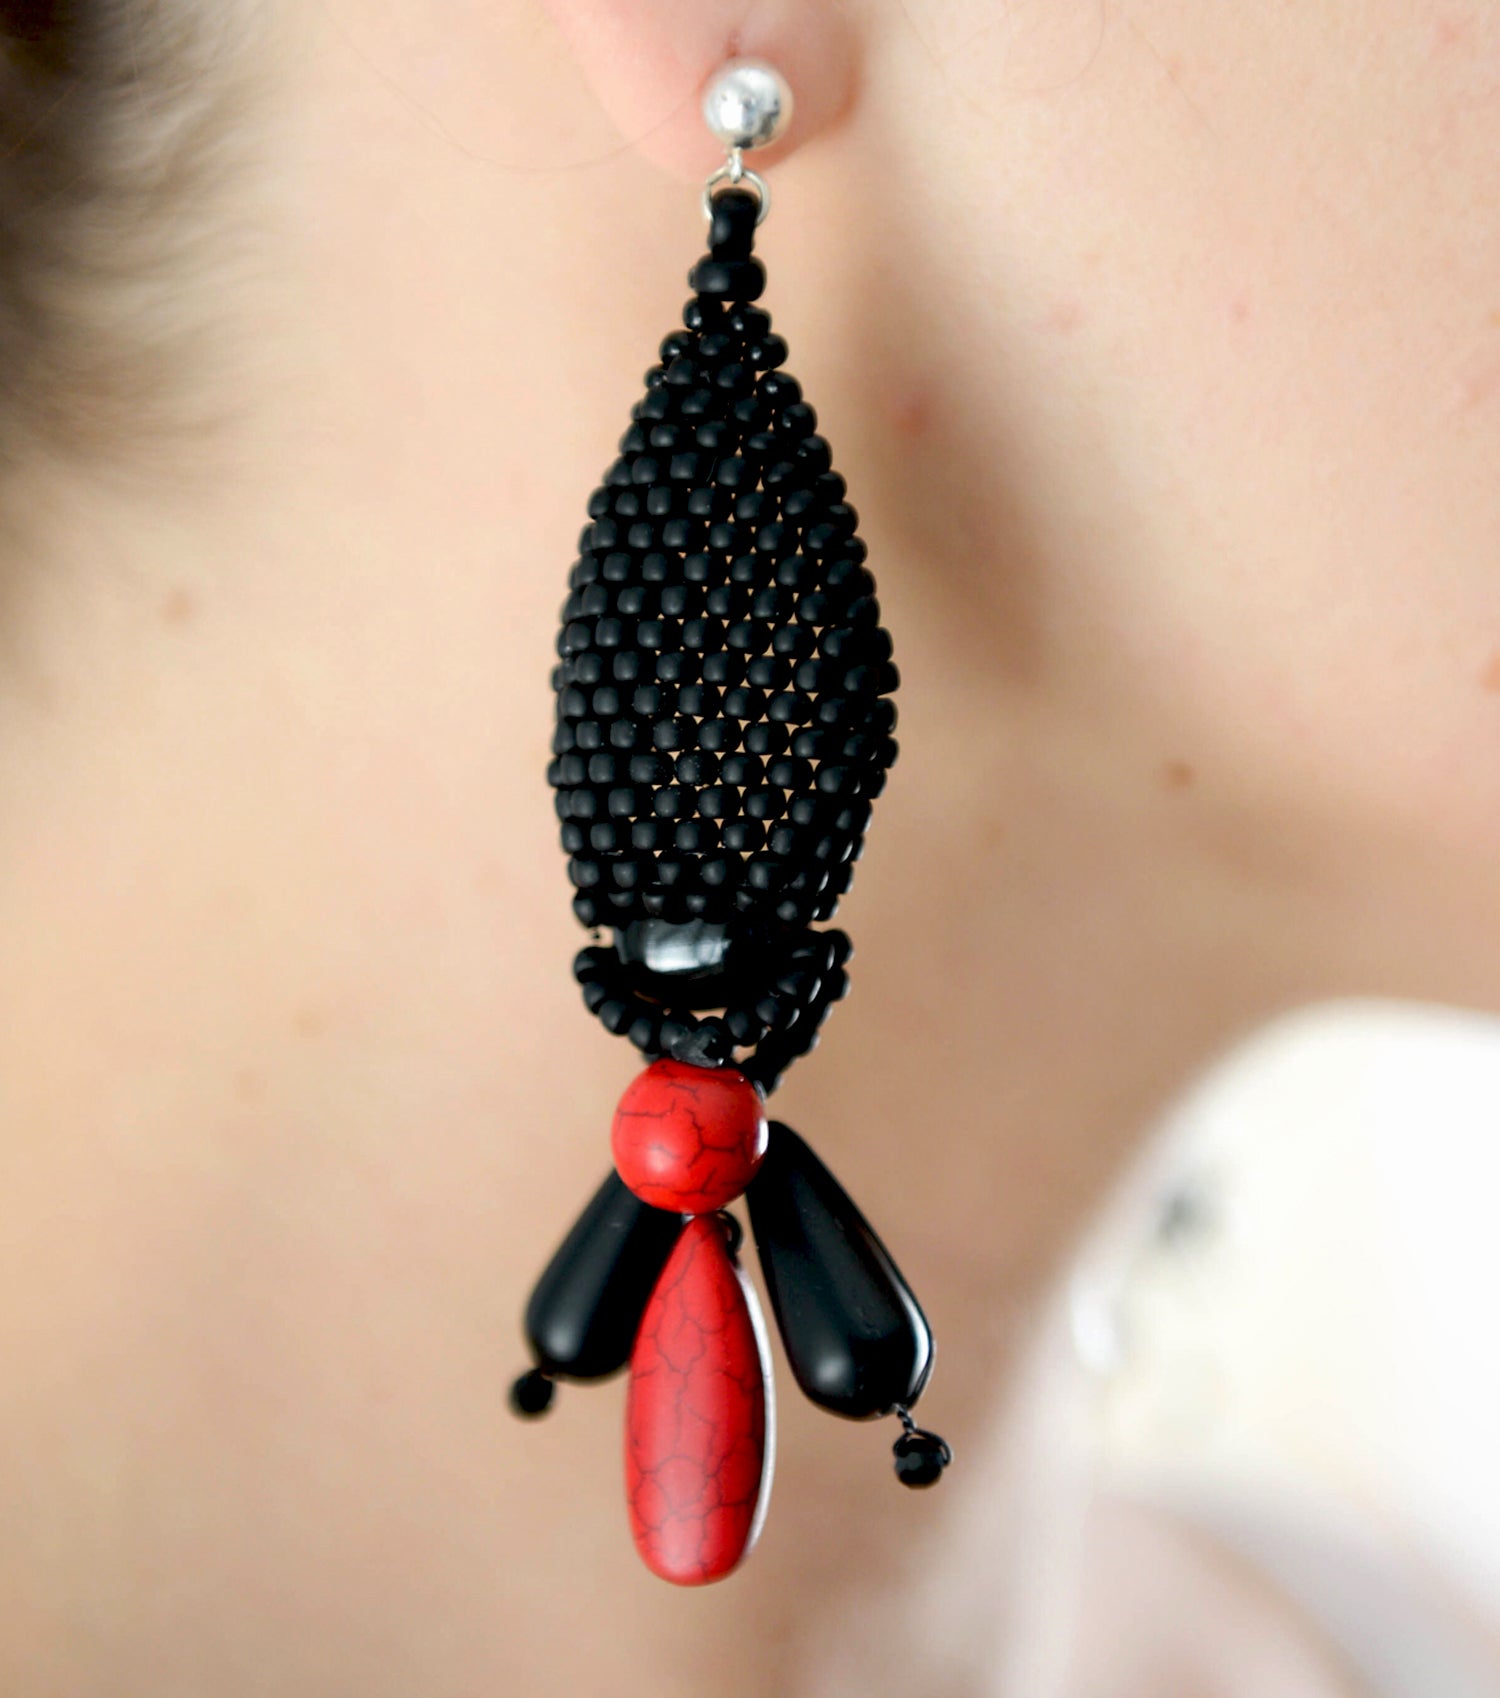 KTC-380 Stunning Statement Earrings - Black Agate - Red Howlite - Free Shipping - Kalitheo Jewellery